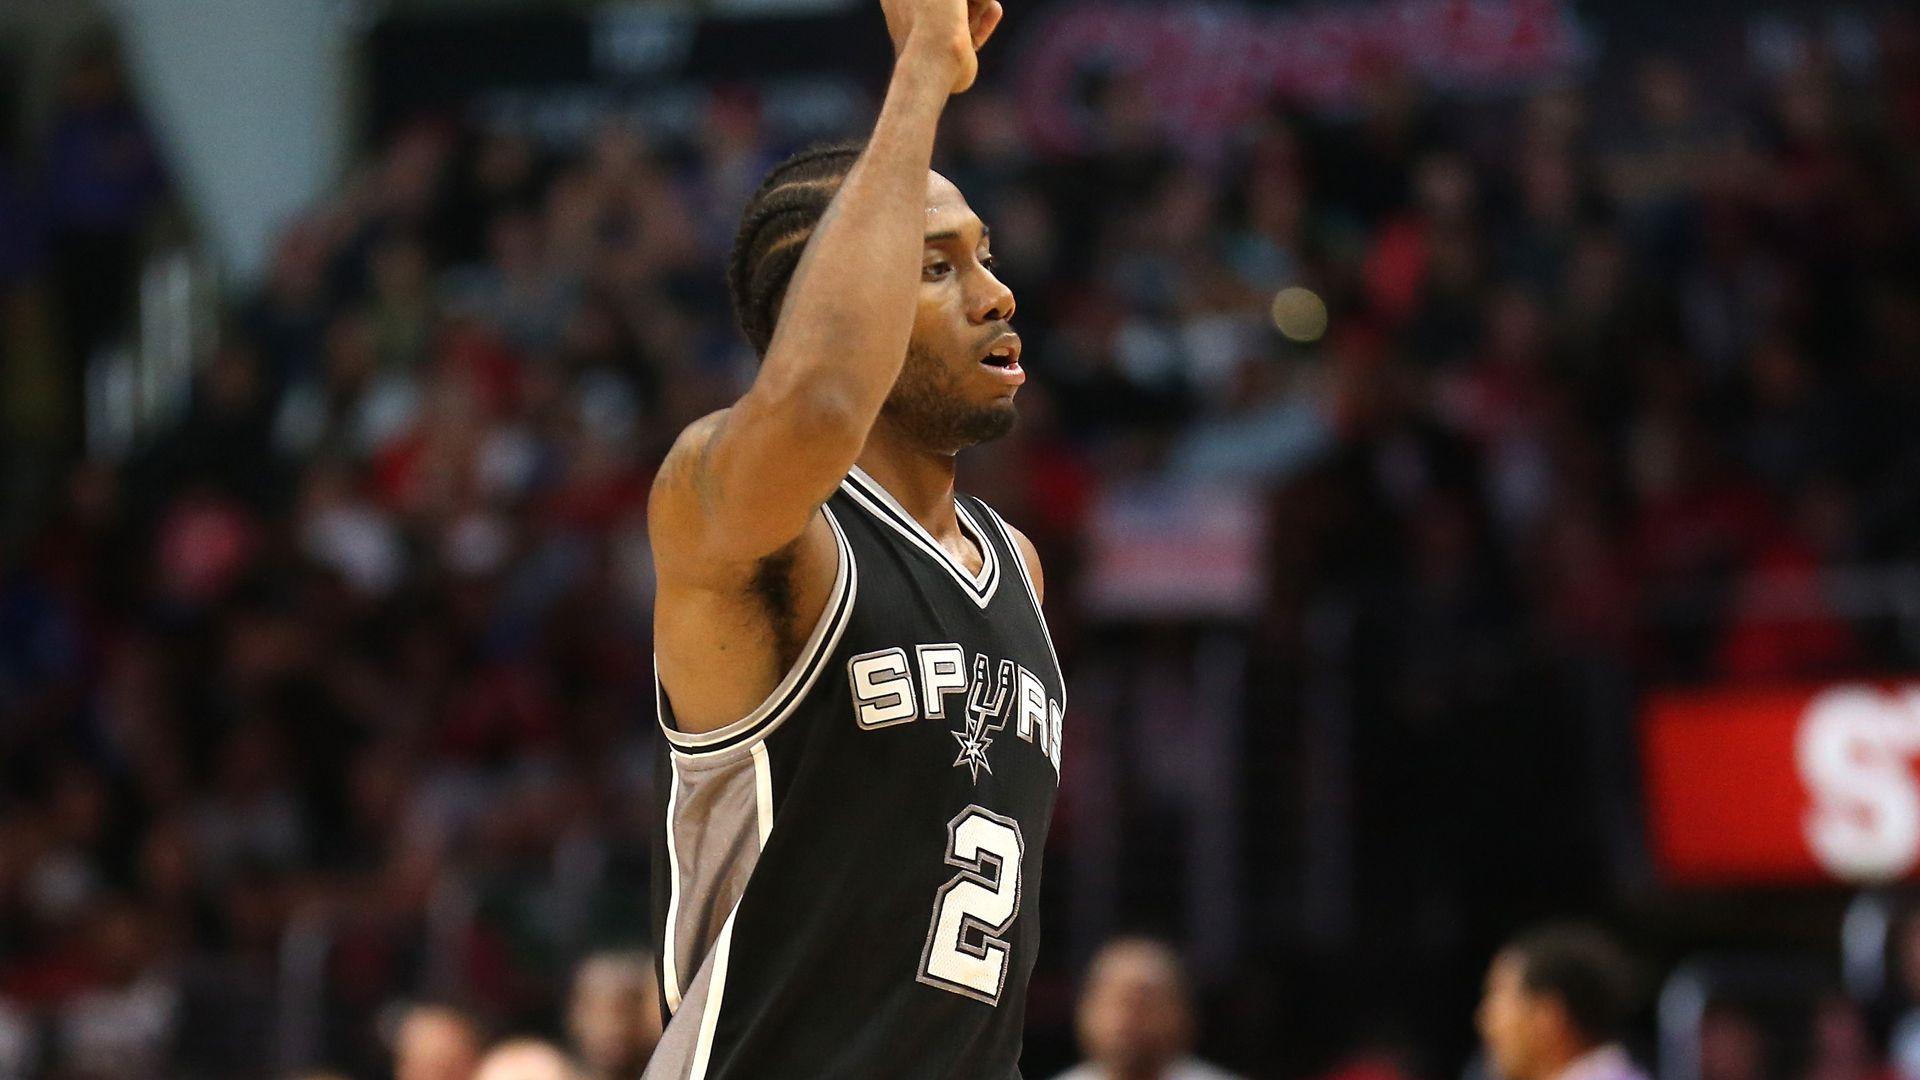 Spurs' Kawhi Leonard does everything late to beat Rockets, then